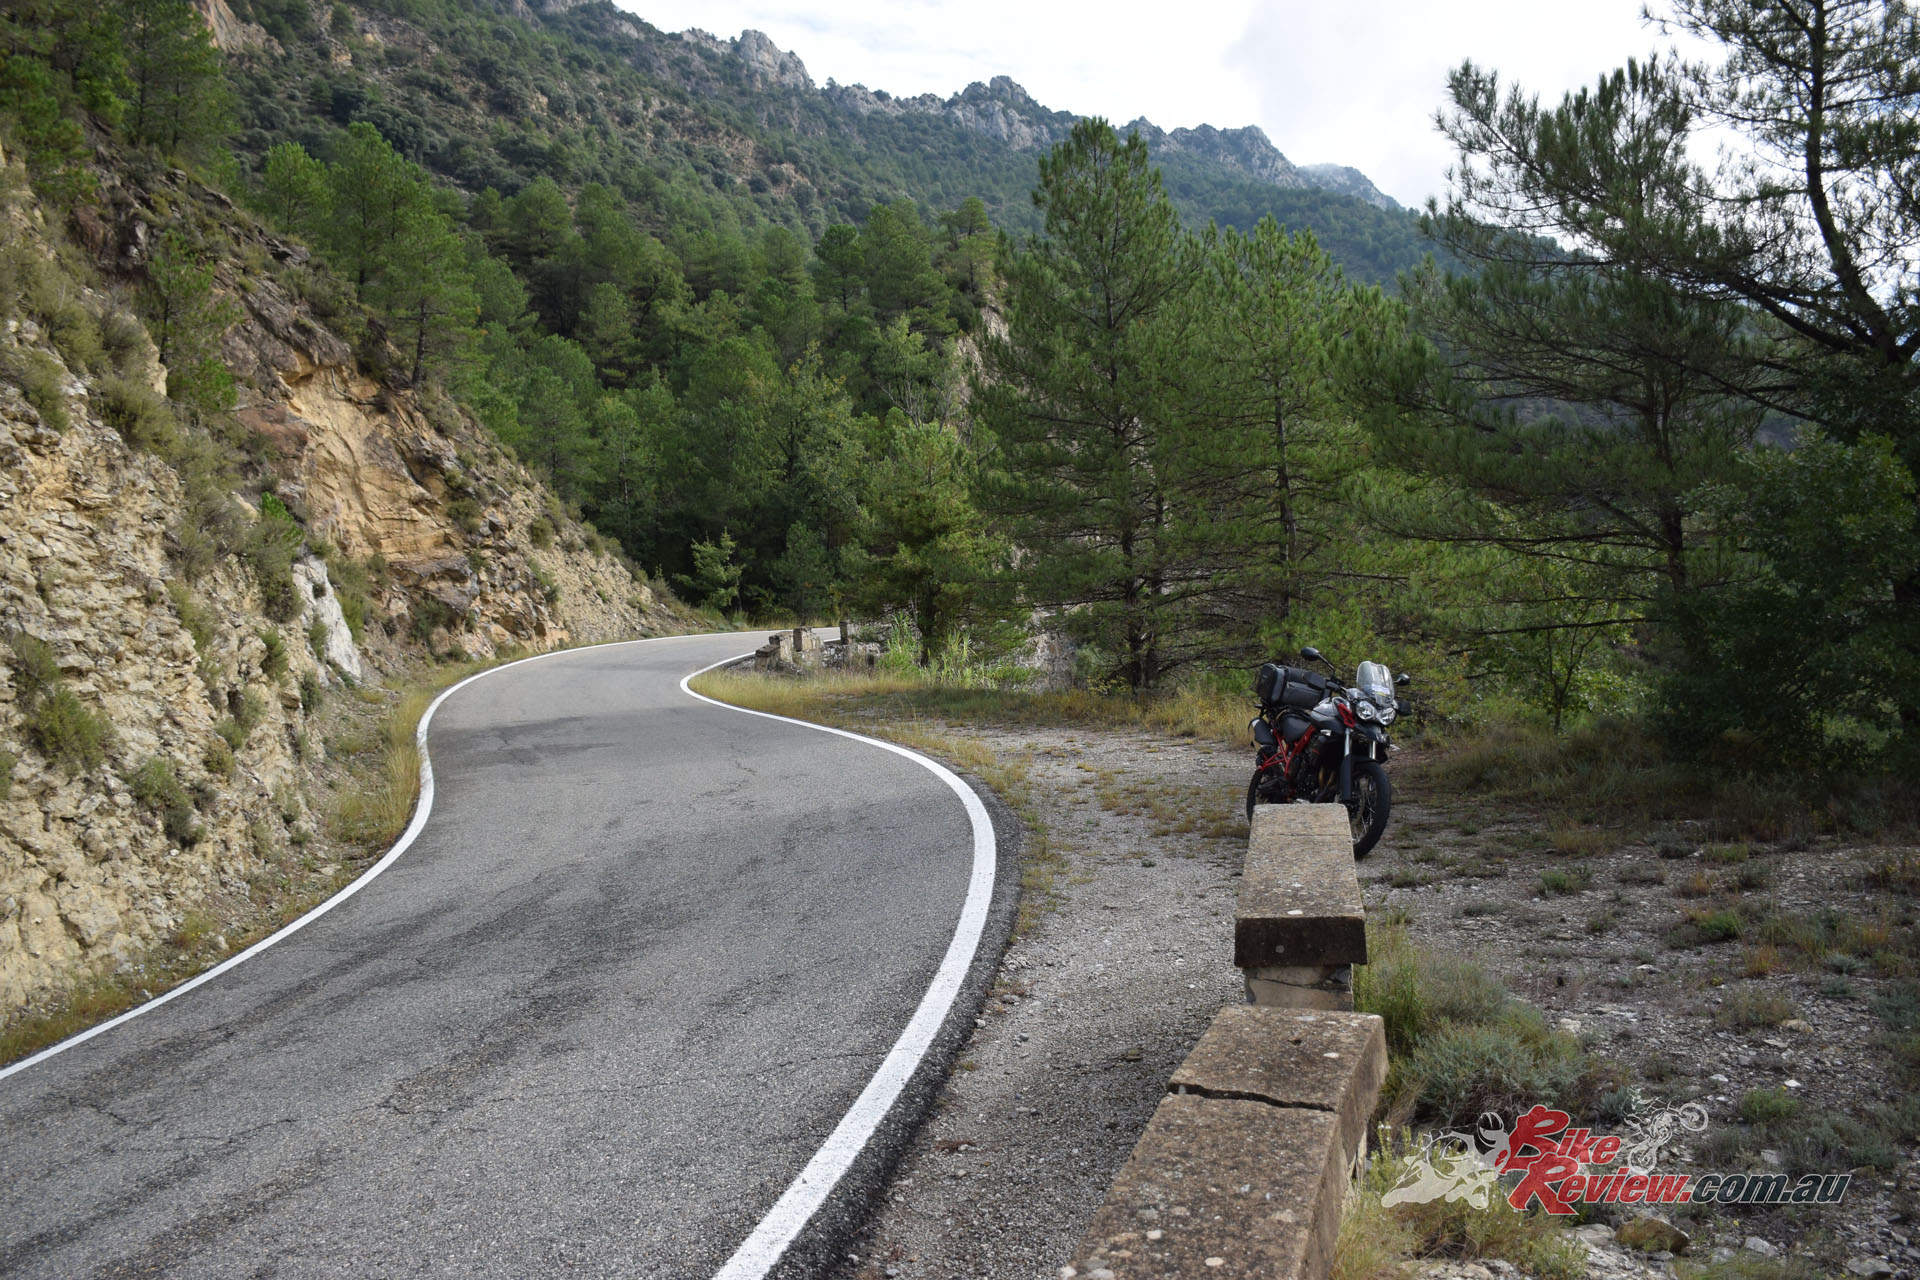 Andalusia is very well known for its magnificent rides. Whether you like tightly winding roads, sweepers or sets of twisties, roam on remote paths or ride on more frequented roads – they are all here.